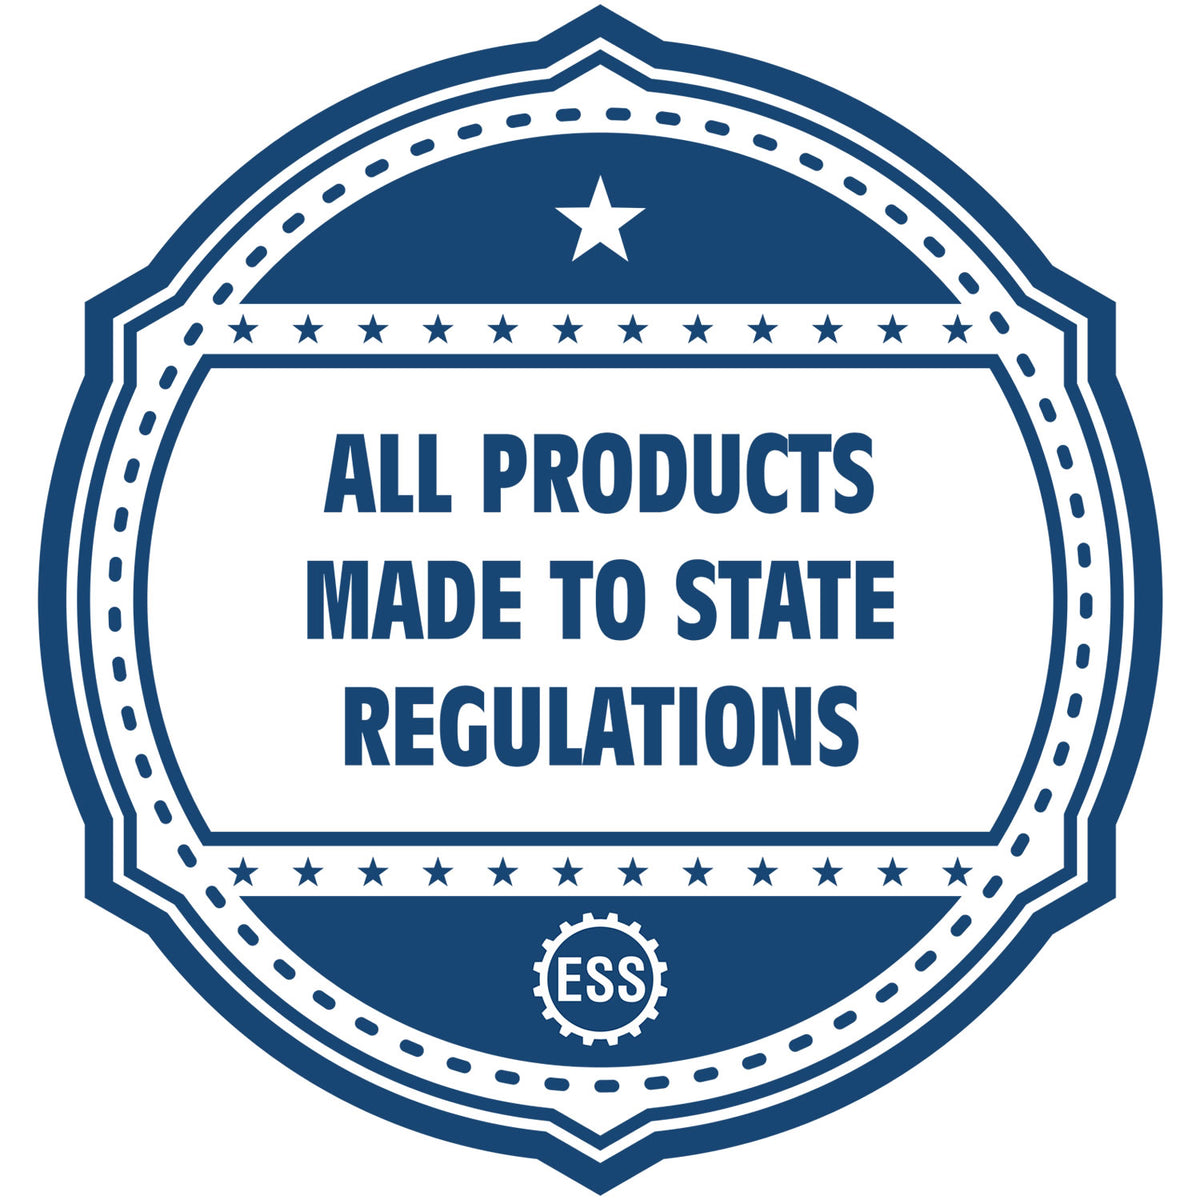 An icon or badge element for the Slim Pre-Inked West Virginia Land Surveyor Seal Stamp showing that this product is made in compliance with state regulations.